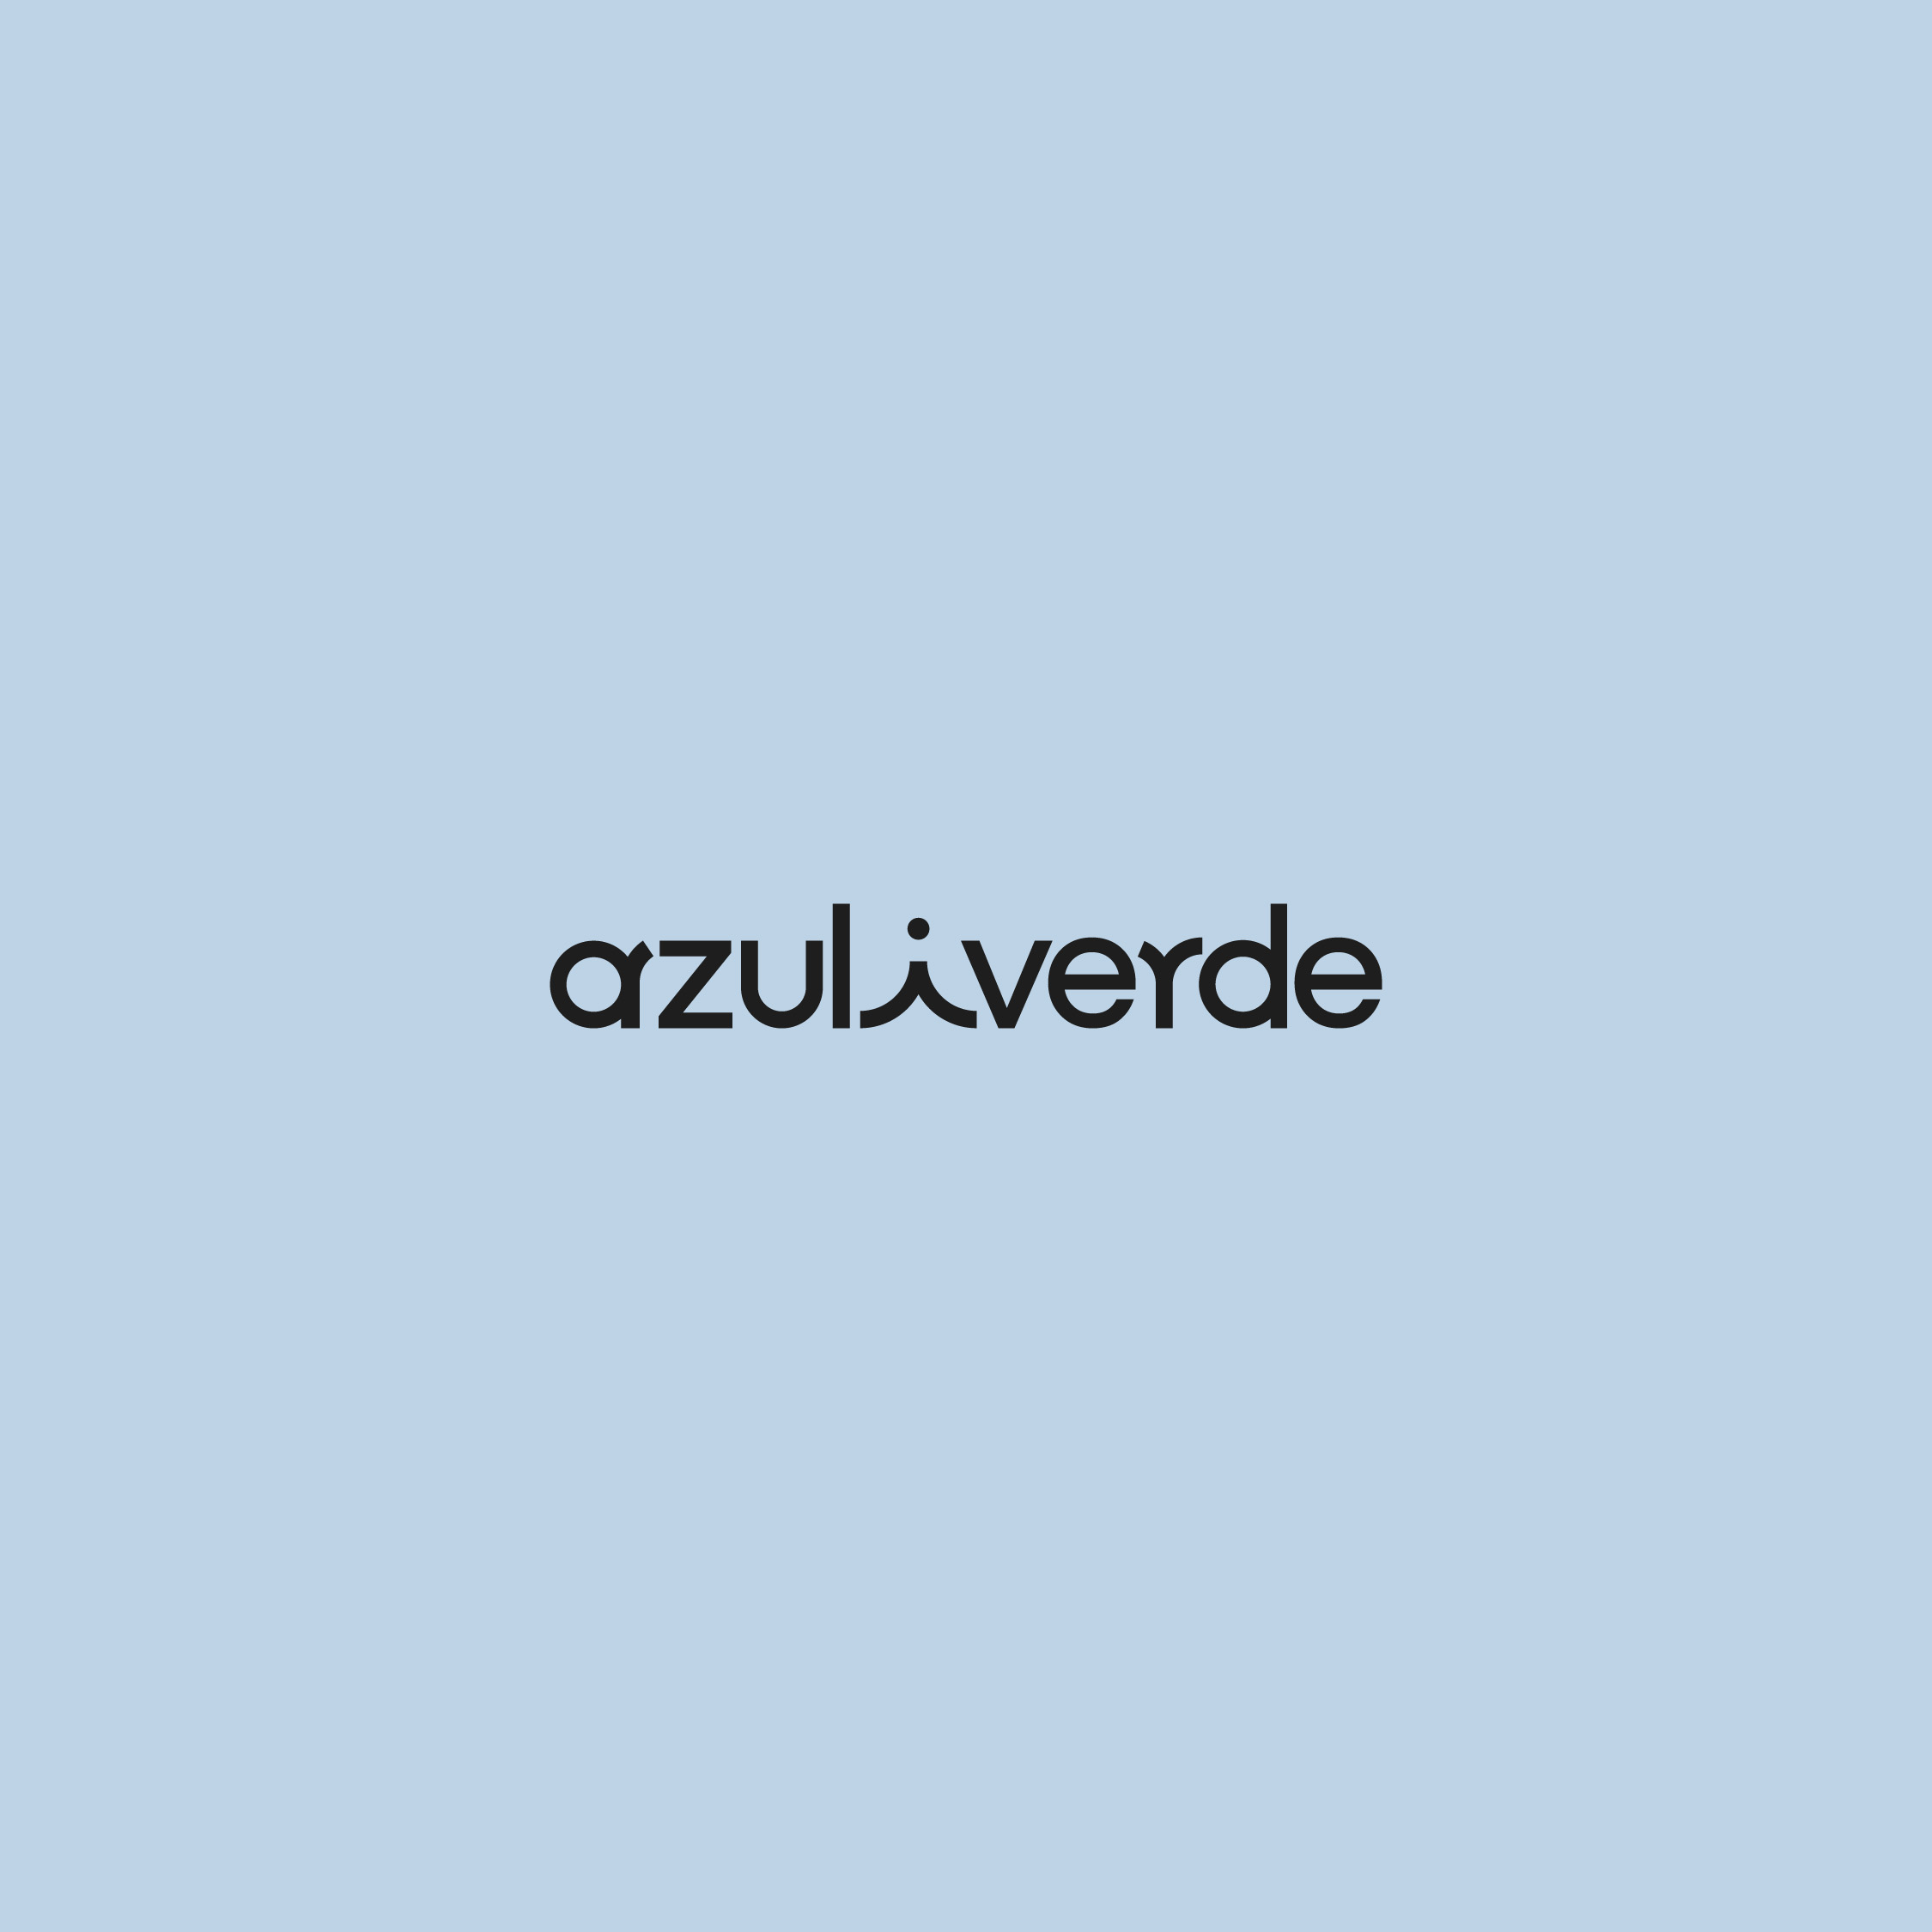 Branding for Azuliverde Created by Rojitas